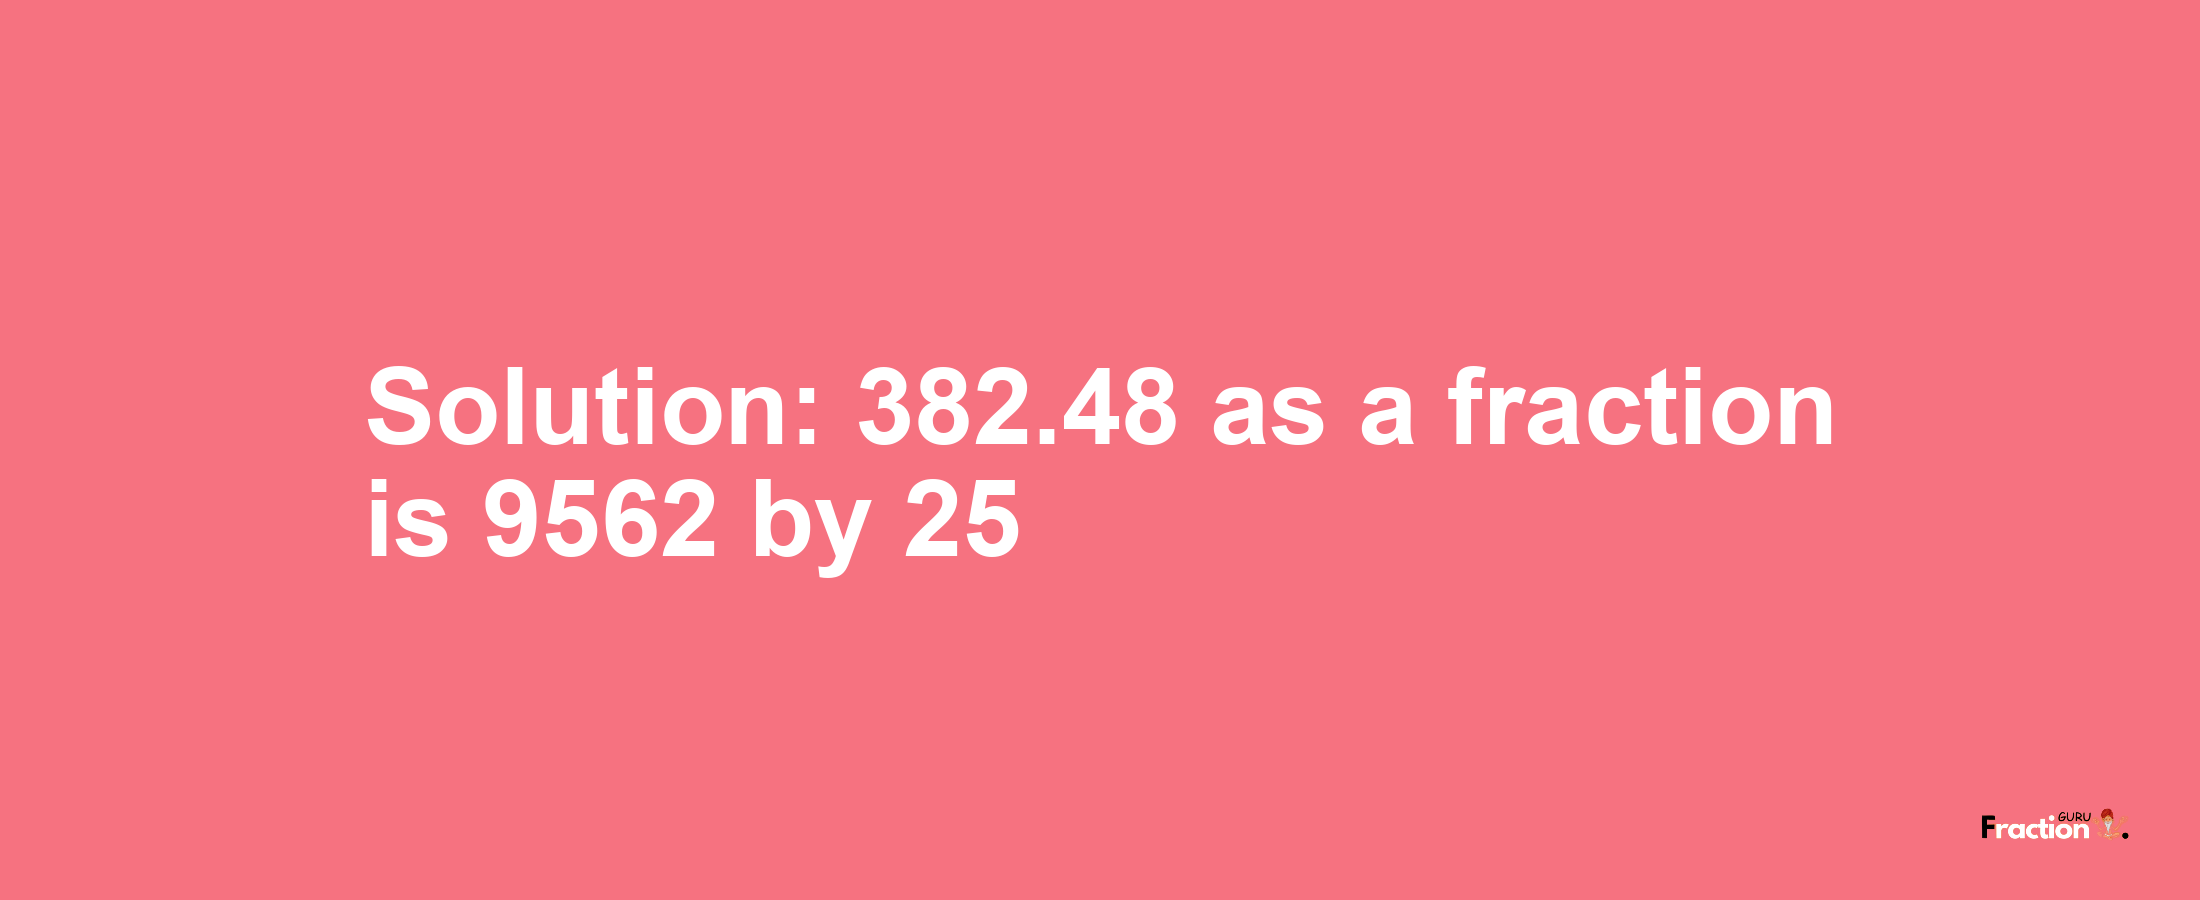 Solution:382.48 as a fraction is 9562/25